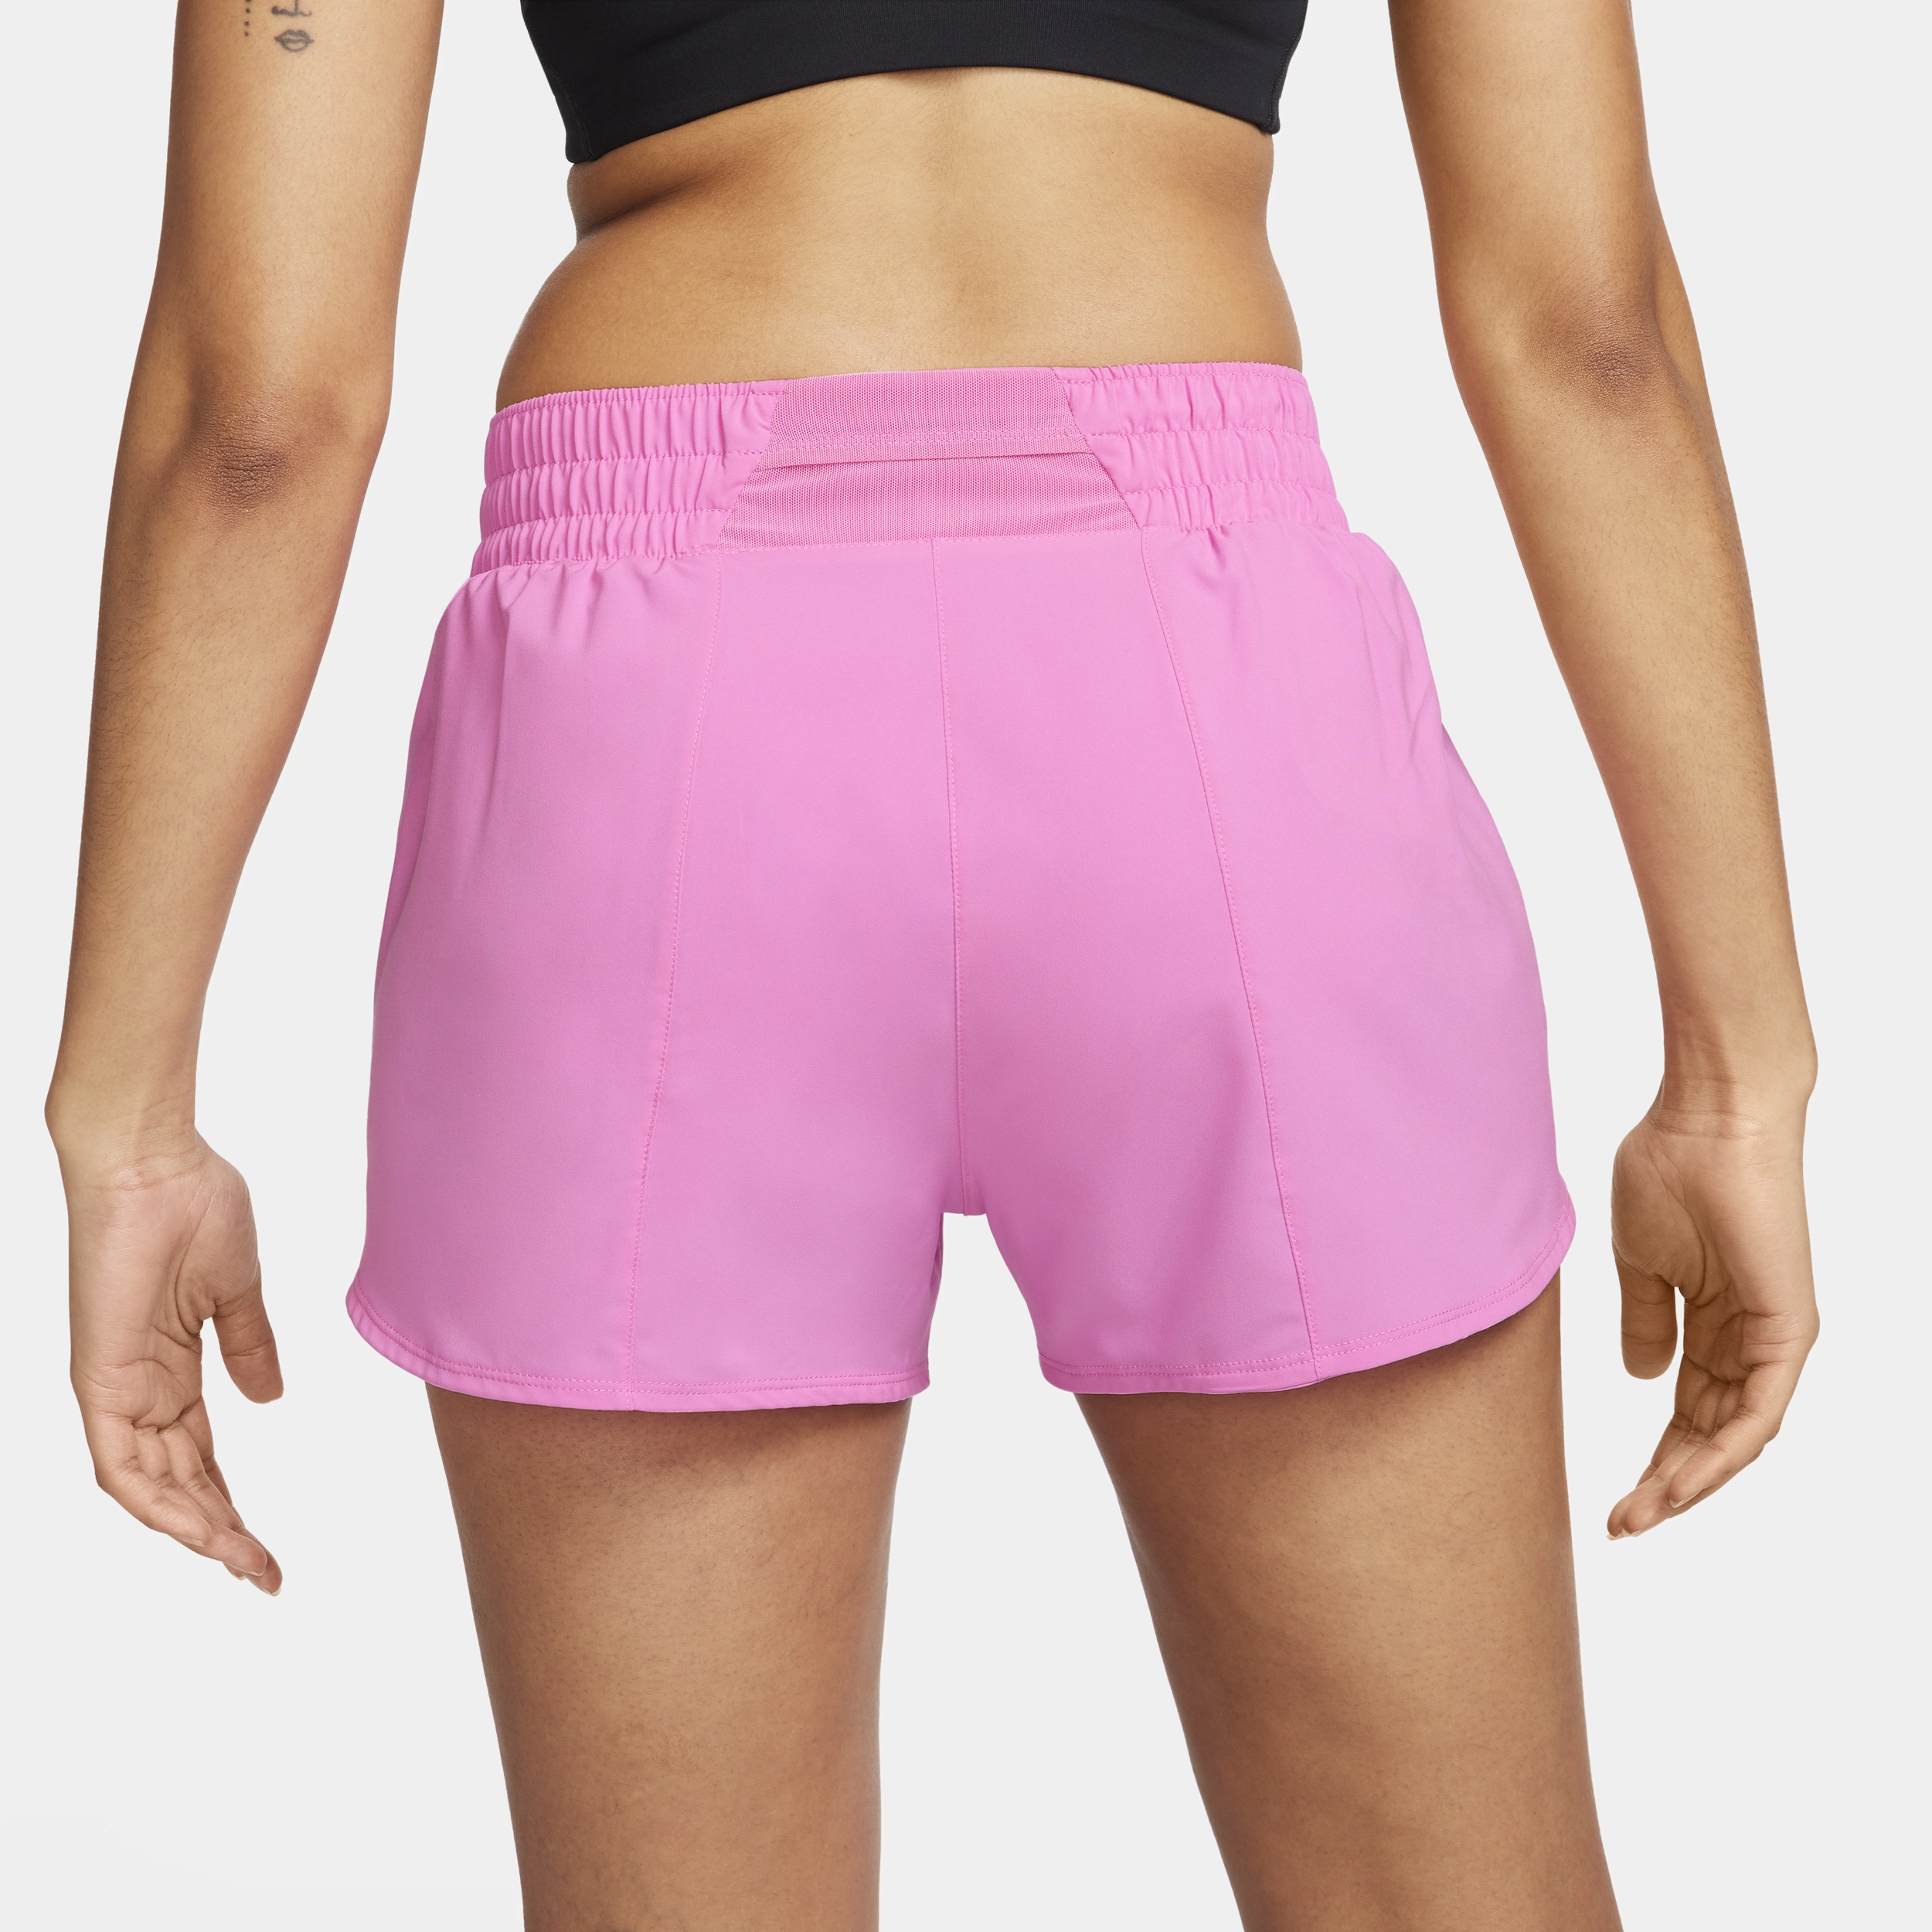 Nike Women's One Dri-FIT High-Waisted 3" Brief-Lined Shorts - 3